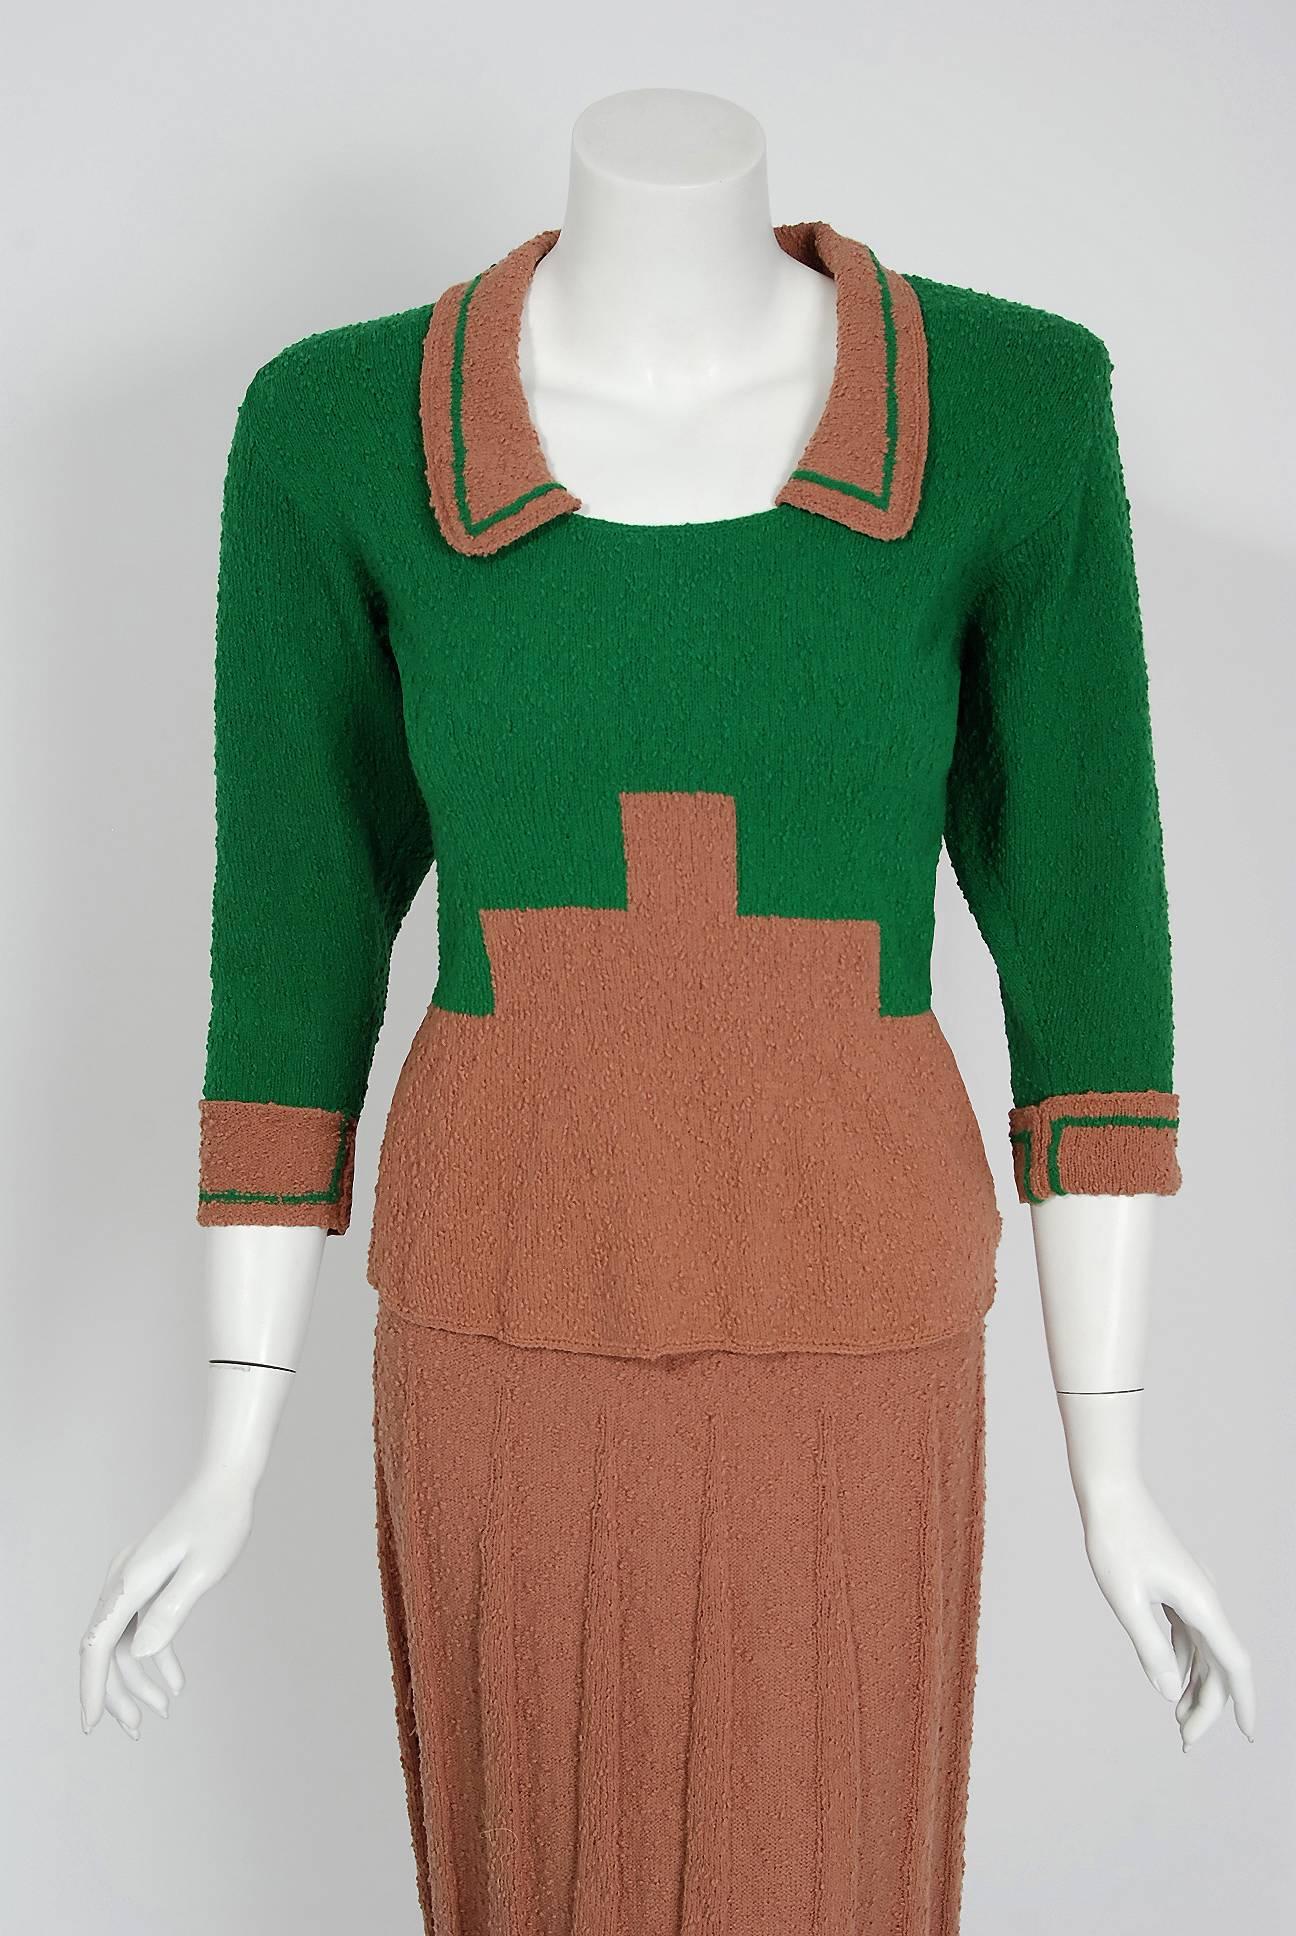 An alluring emerald-green and toffee block color deco motif boucle wool-knit ensemble from the early 1940's Old Hollywood era of glamour. The beautiful sweater blouse has slightly padded shoulders for that fantastic shape. I love the low-cut